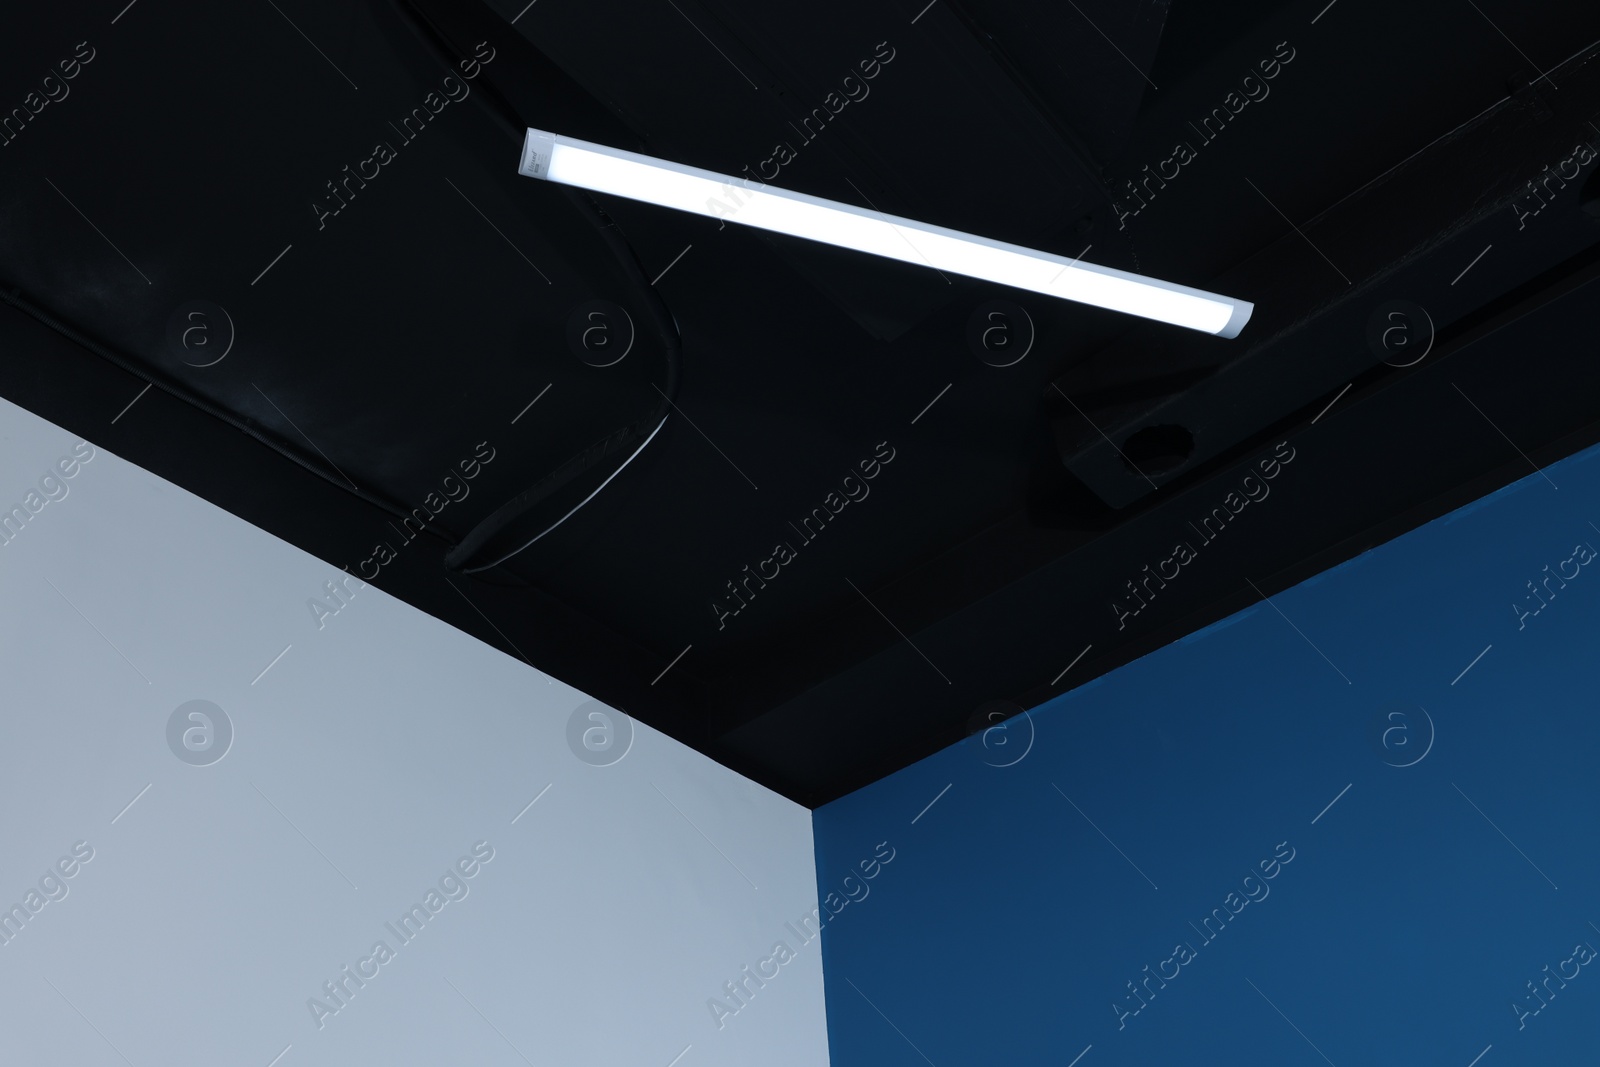 Photo of Room corner and black ceiling with modern light